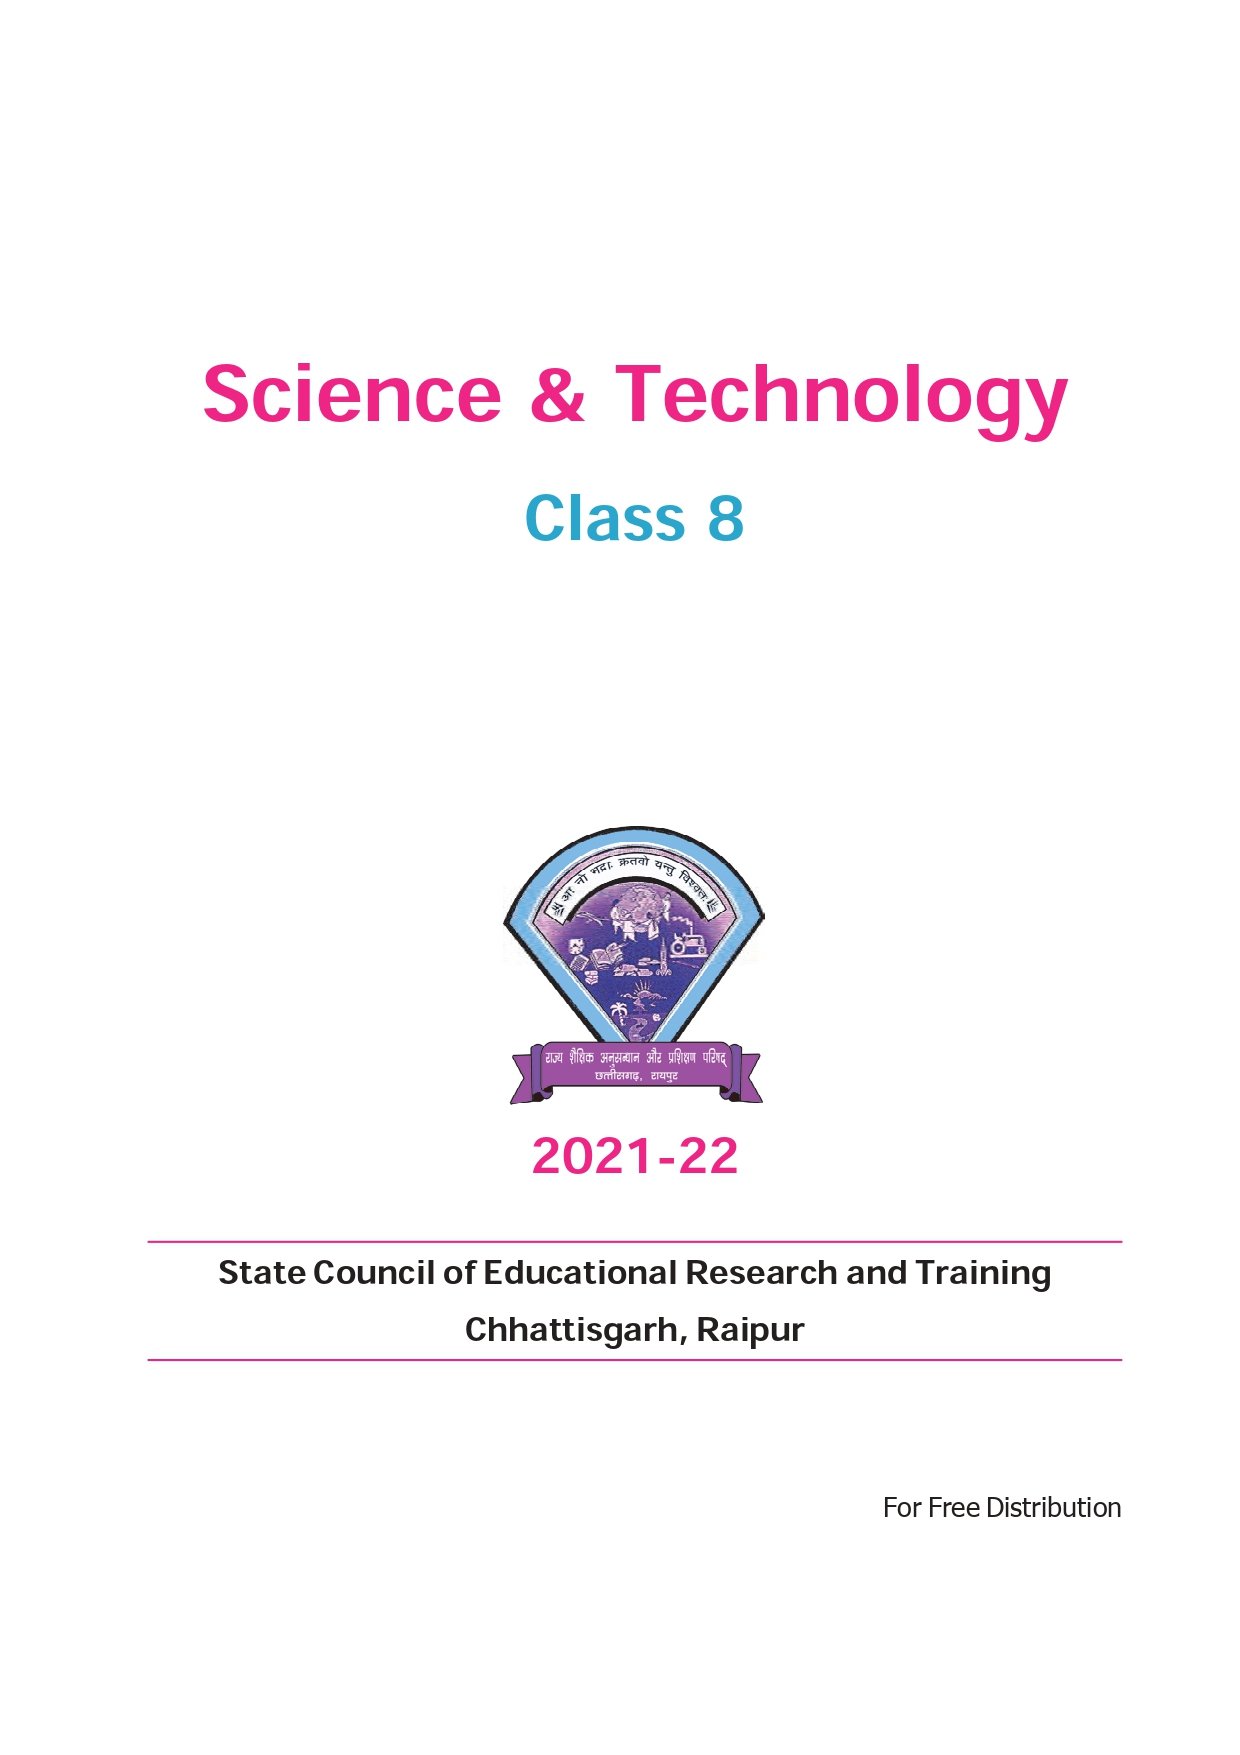 ICSE Model Paper Class 8 Computer Science Solved on Extramarks App by  chauhankalpana199 - Issuu